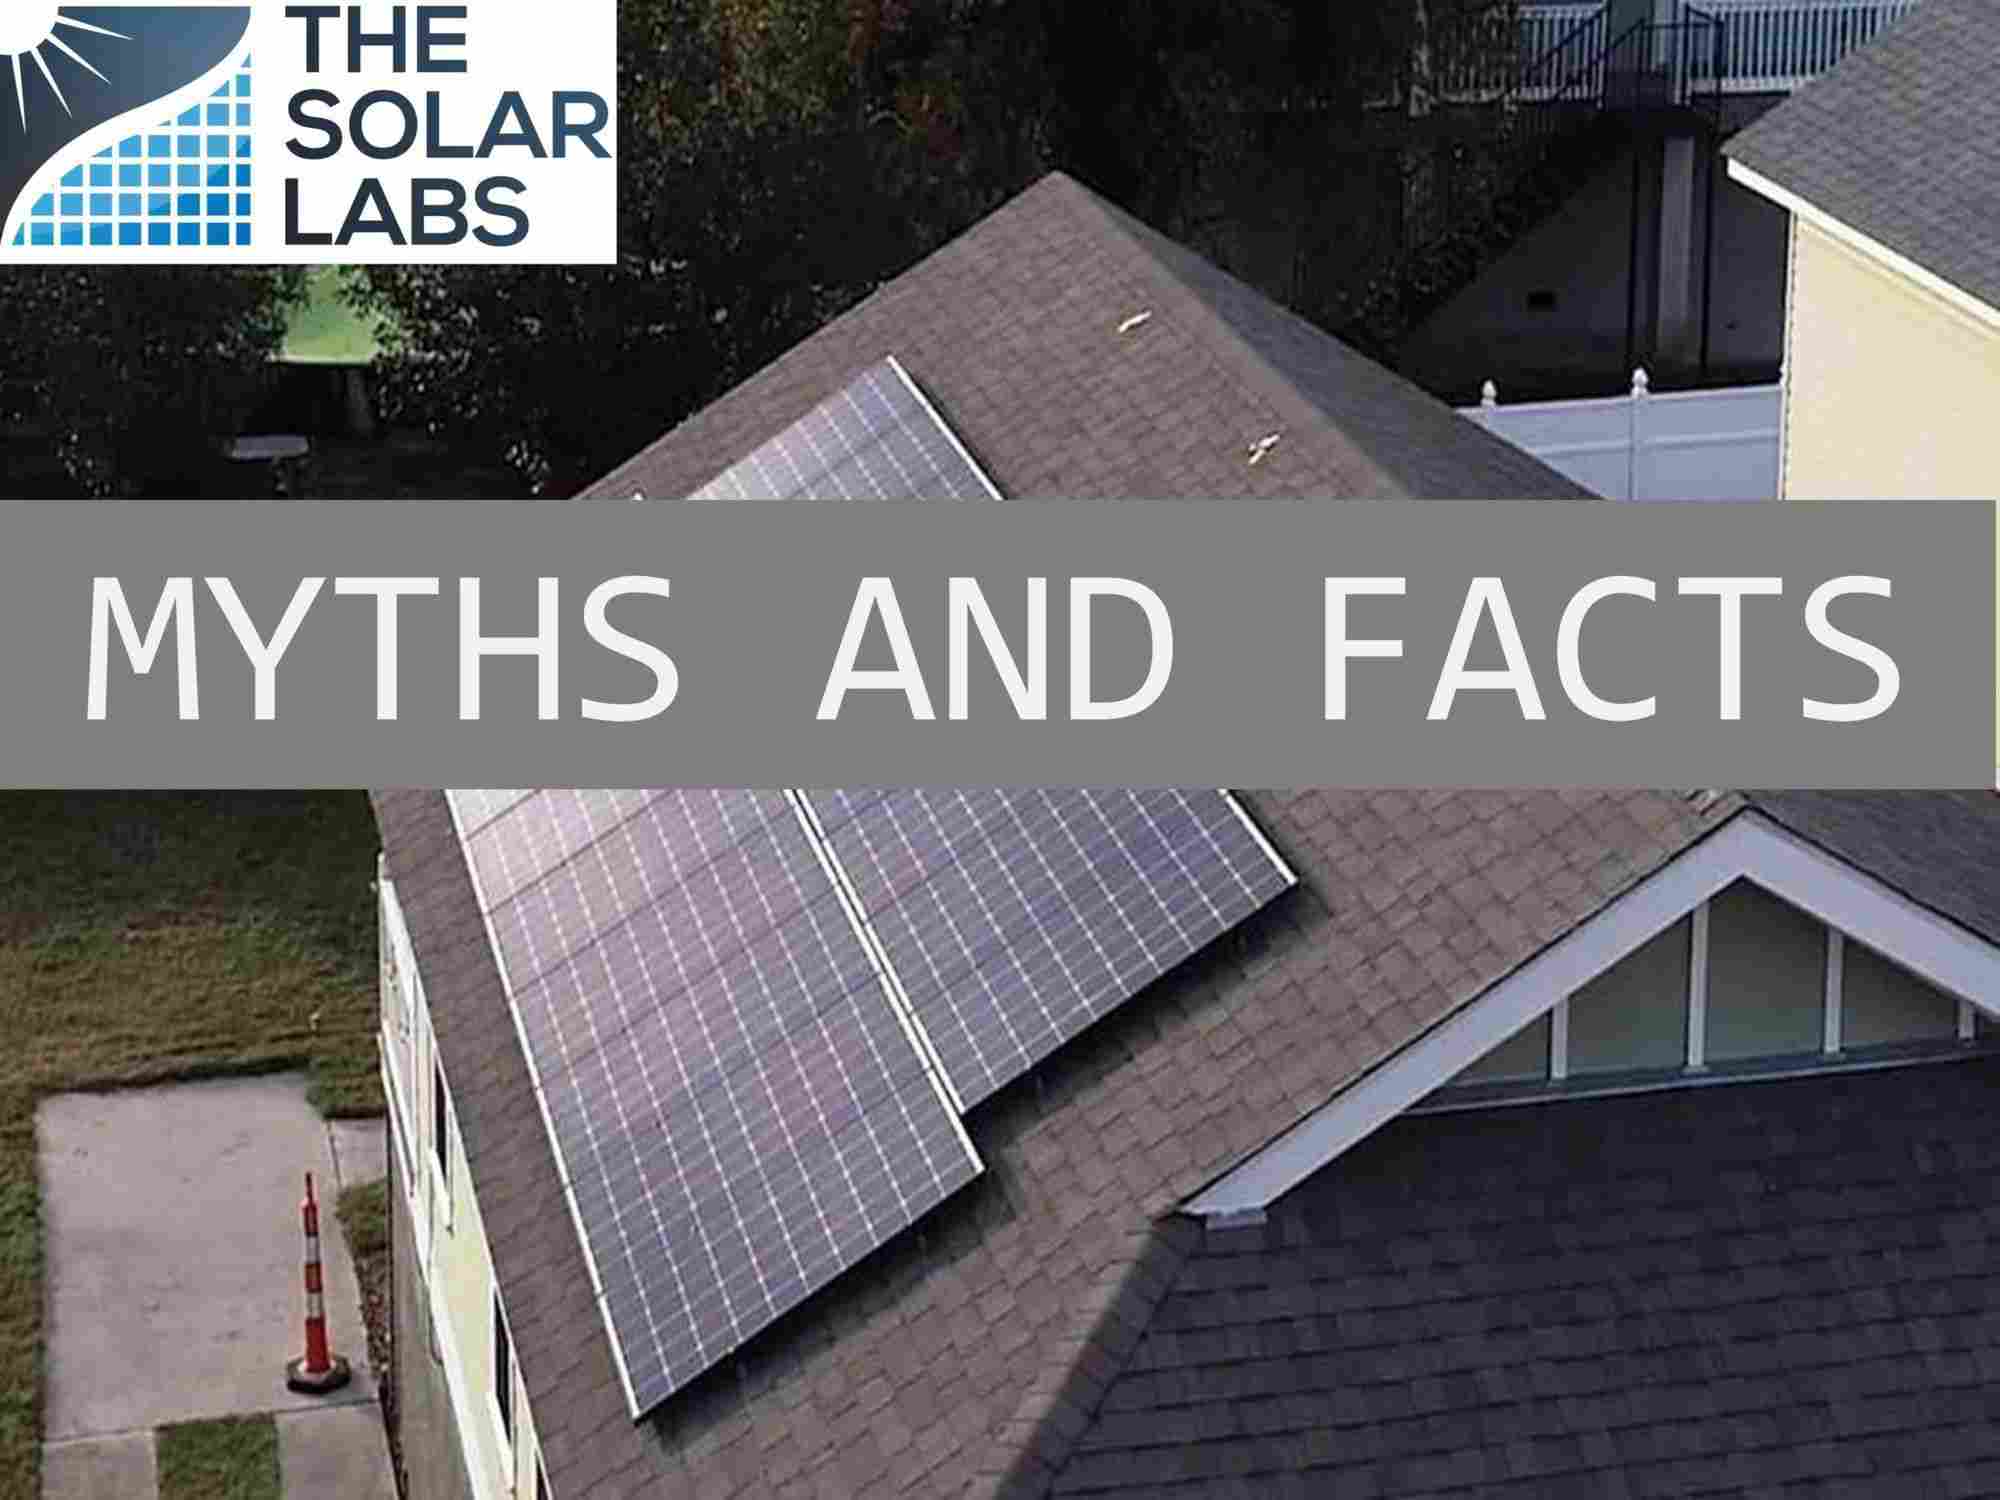 Top 5 myths about rooftop solar